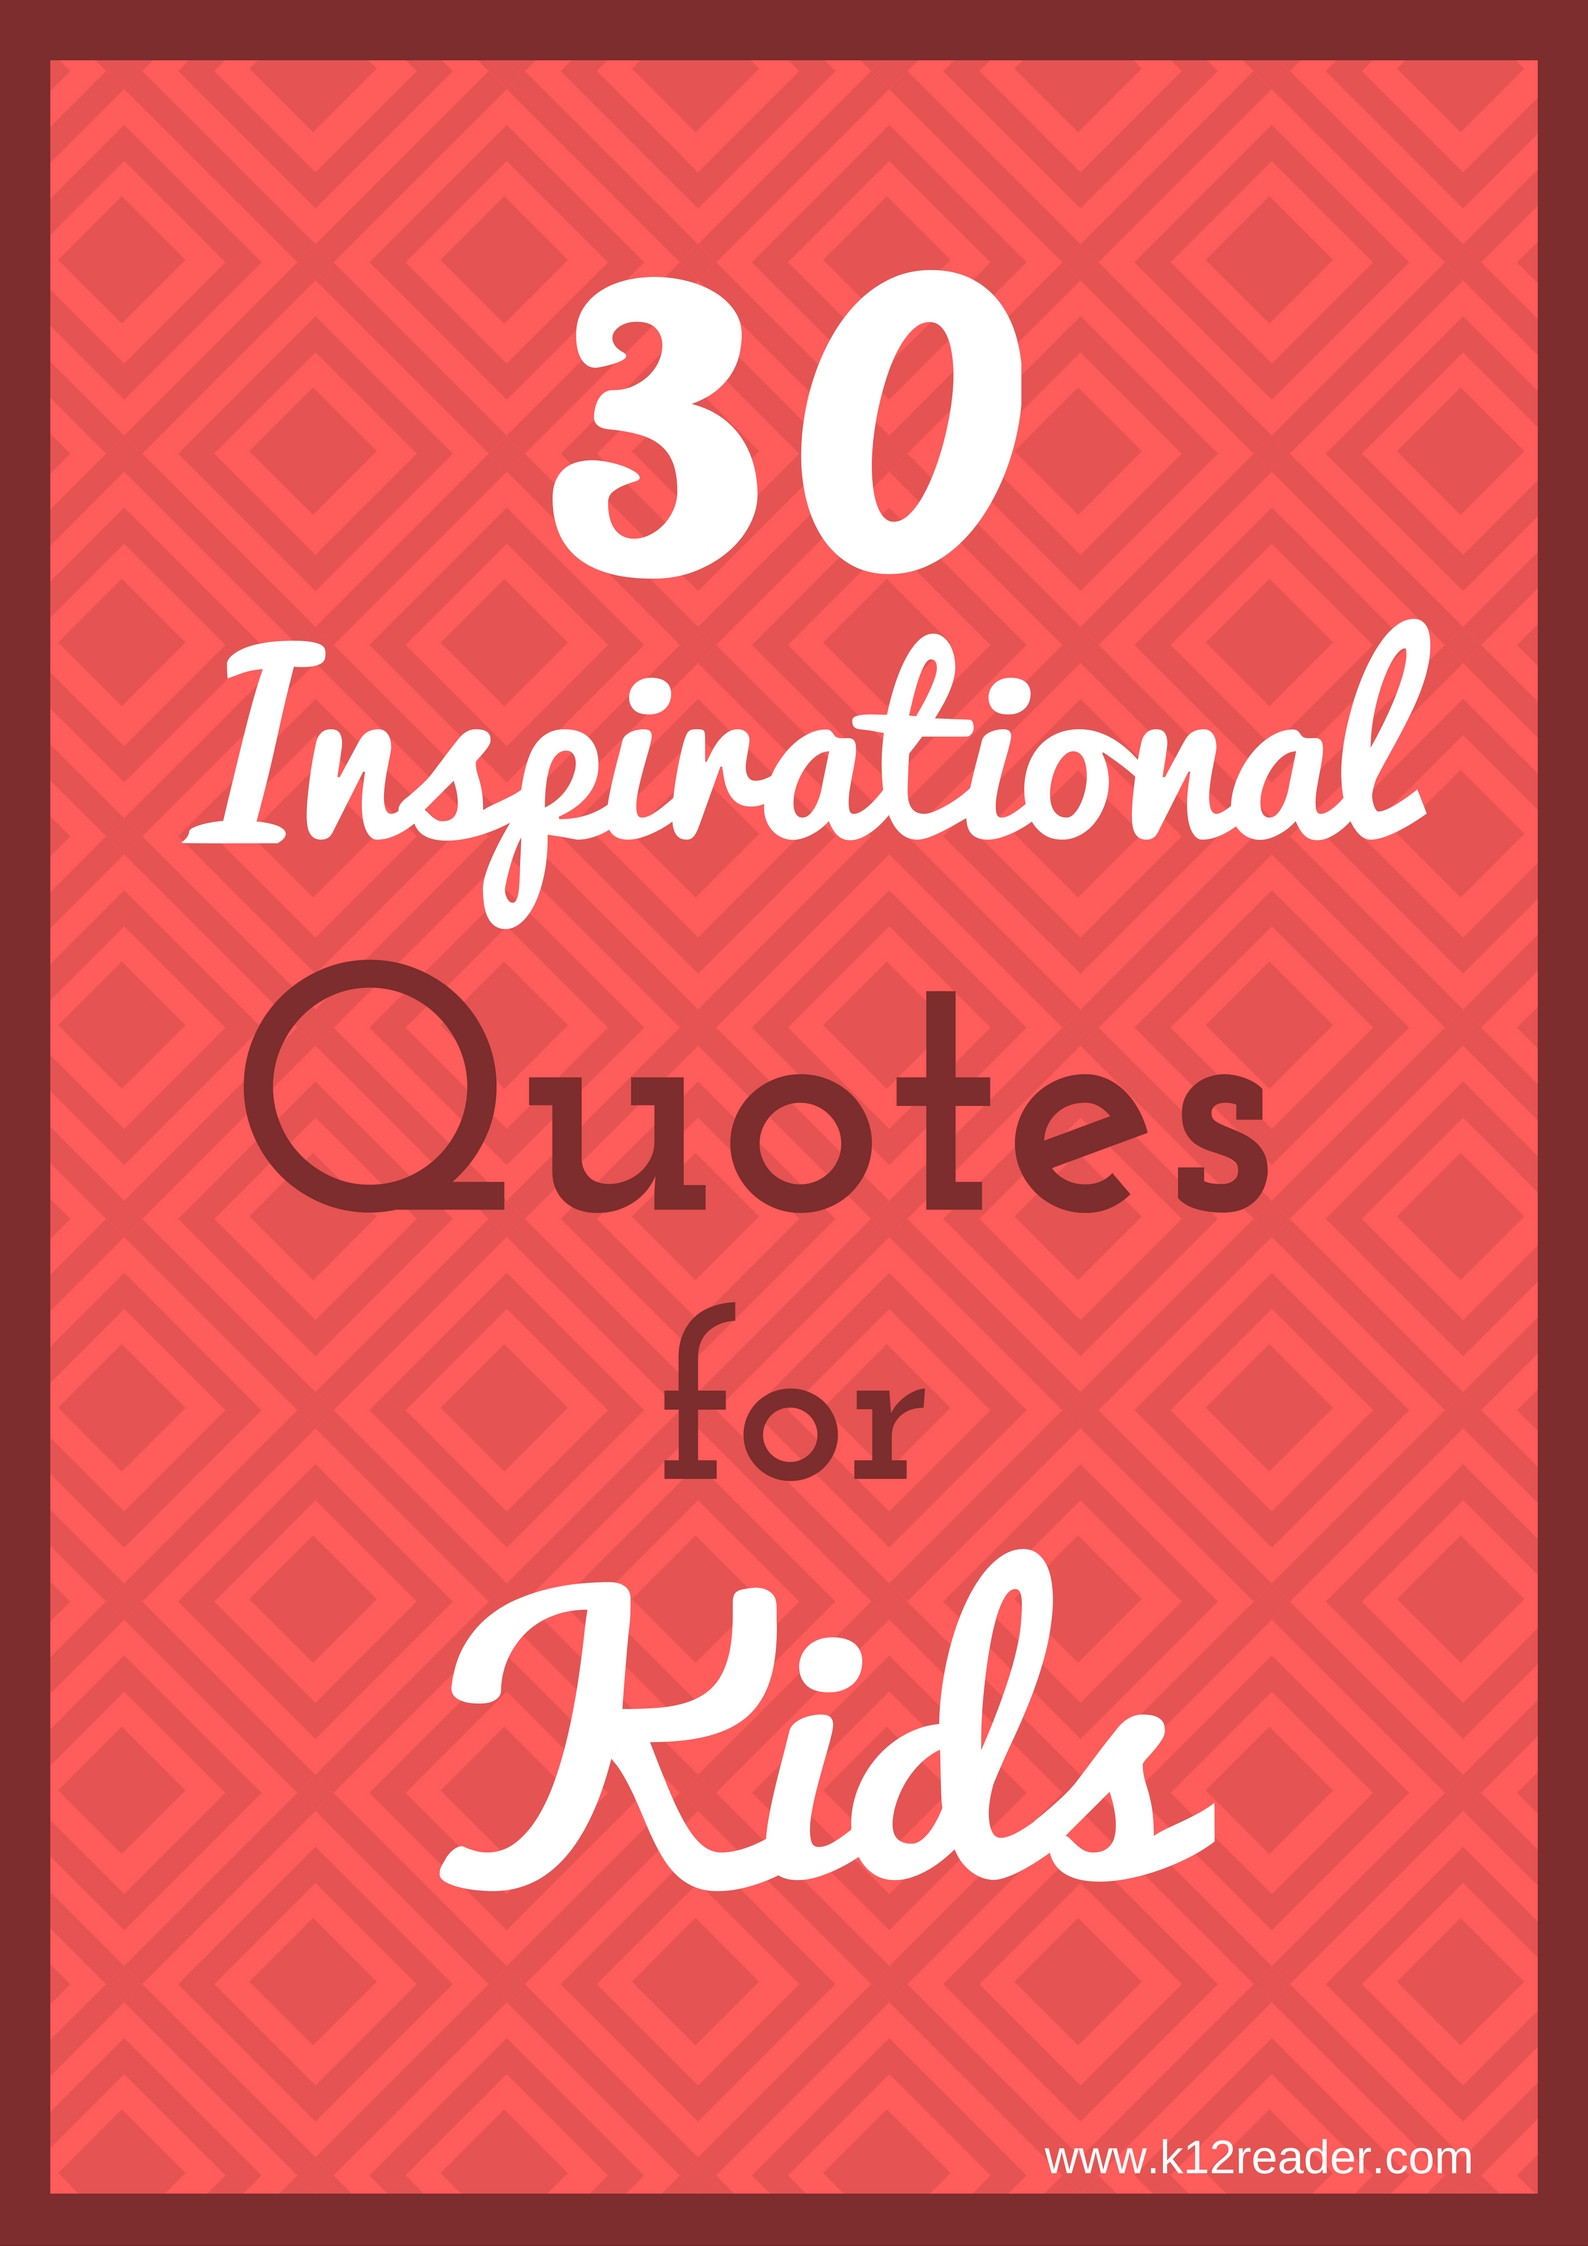 Children Inspirational Quote
 30 Inspirational Quotes for Kids